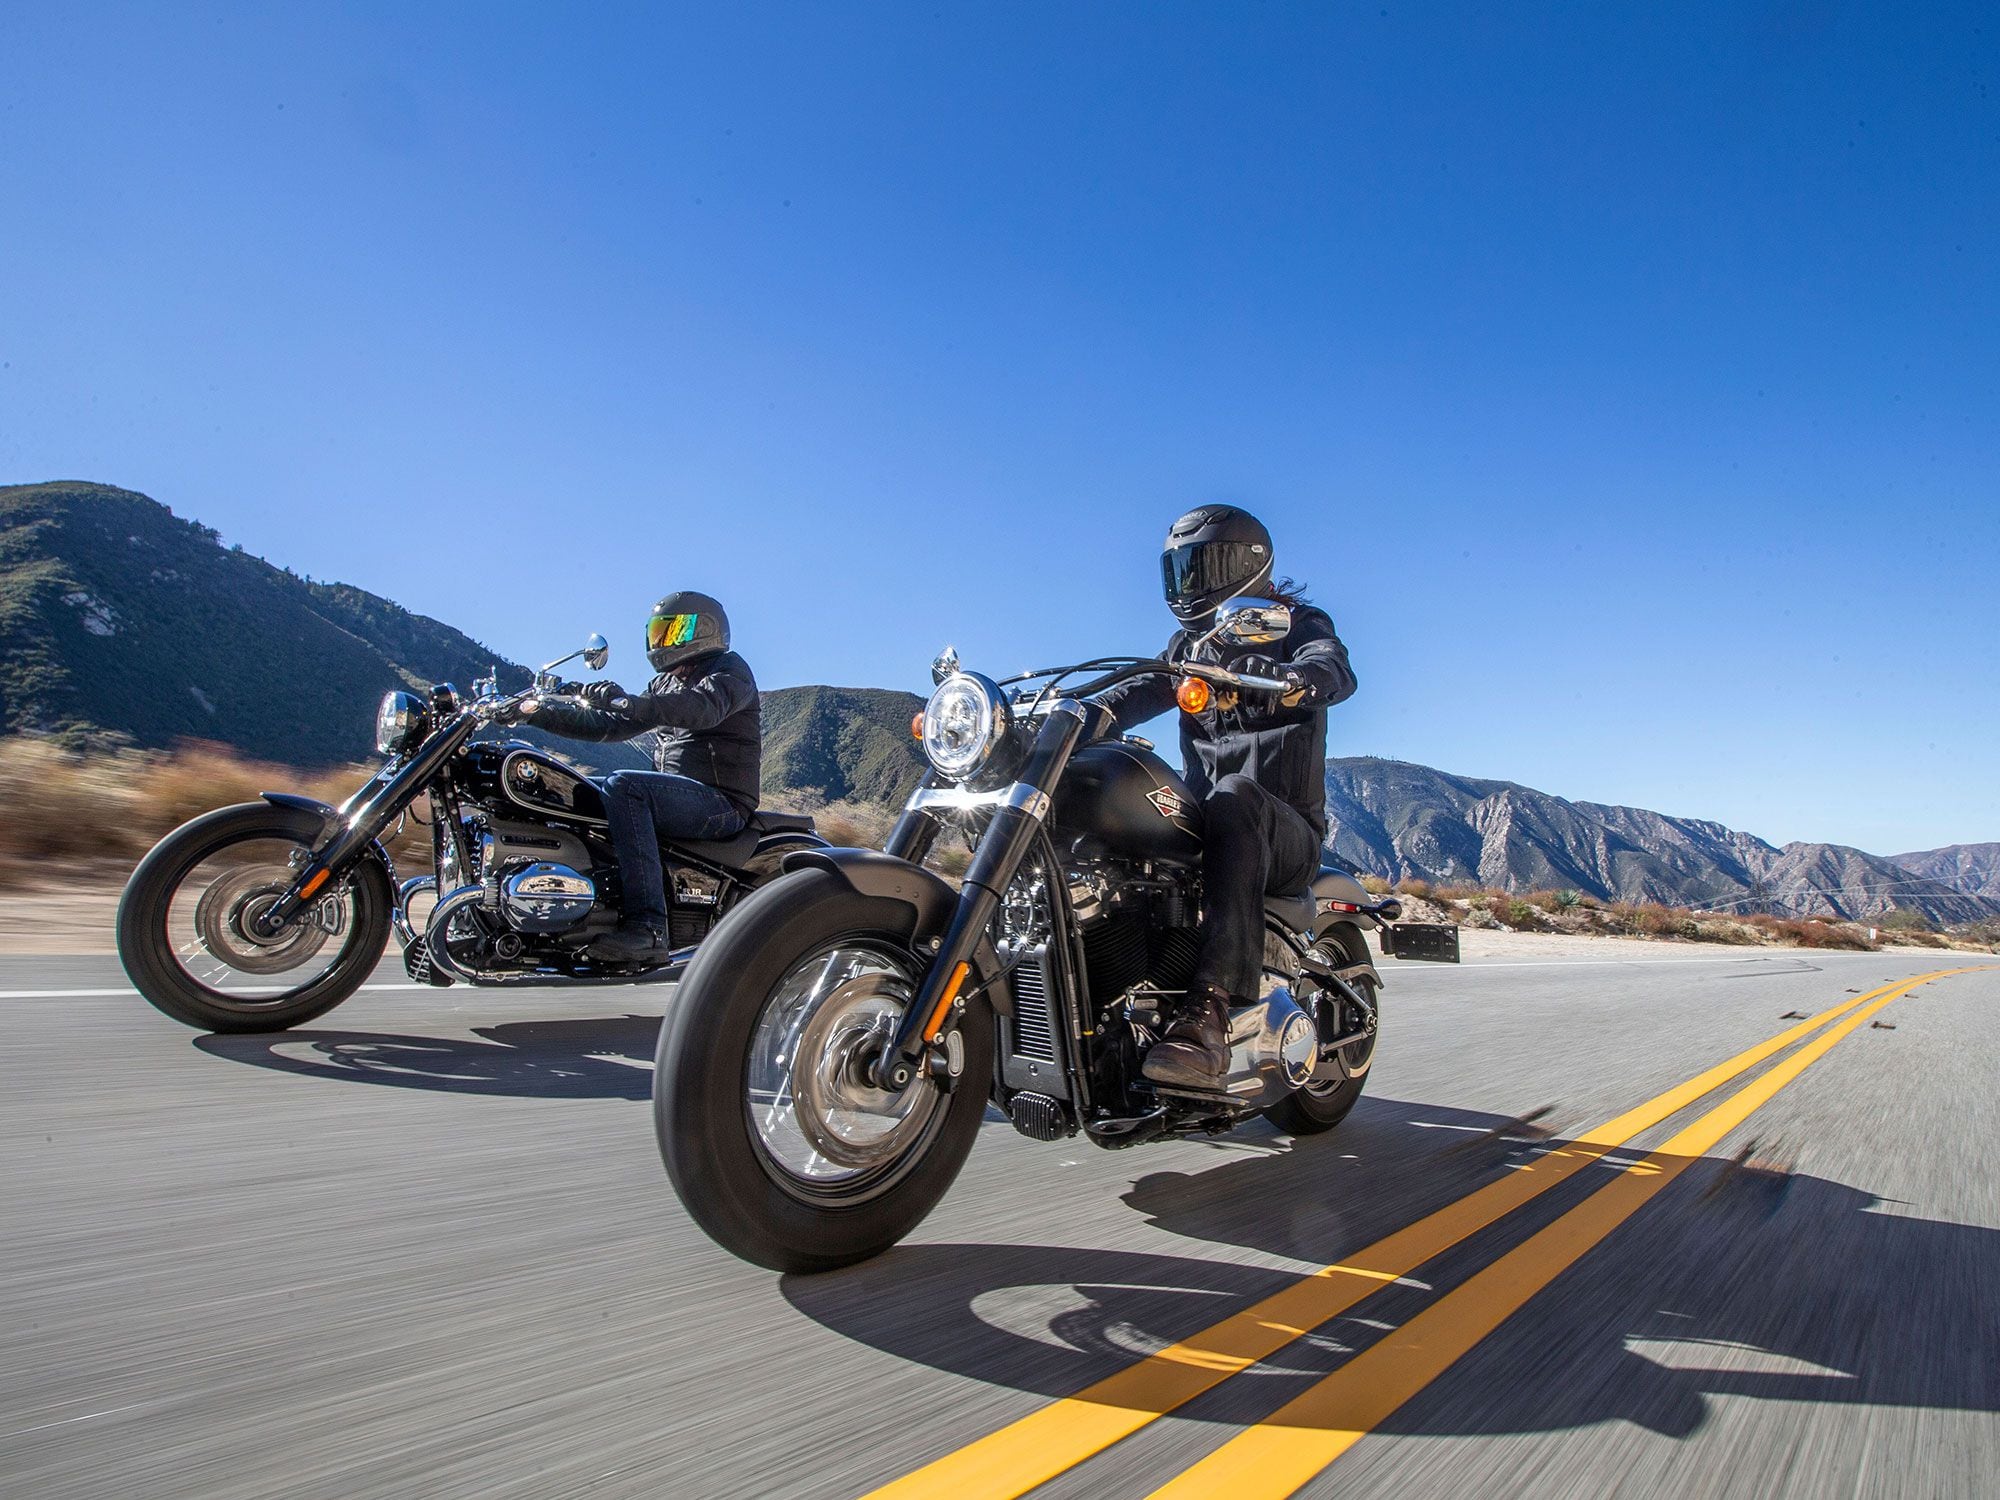 BMW rolls the R 18 cruiser onto American highways. We grab a Harley-Davidson Softail Slim to compare technology, tradition, and culture in two modern heavyweight twins.